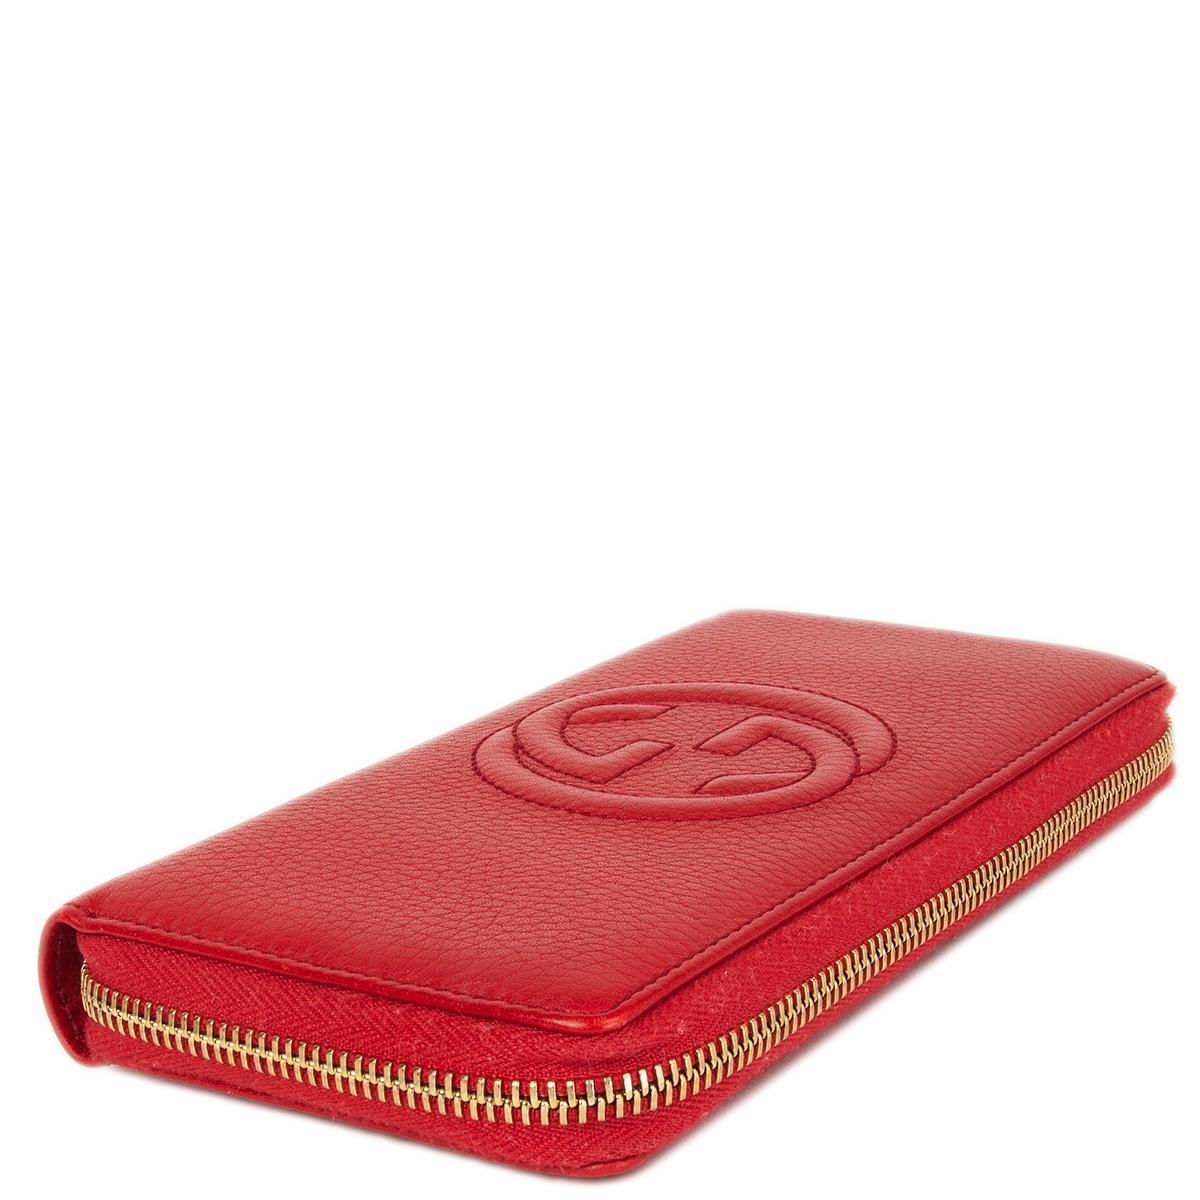 Red GUCC red leather SOHO ZIP AROUND Wallet